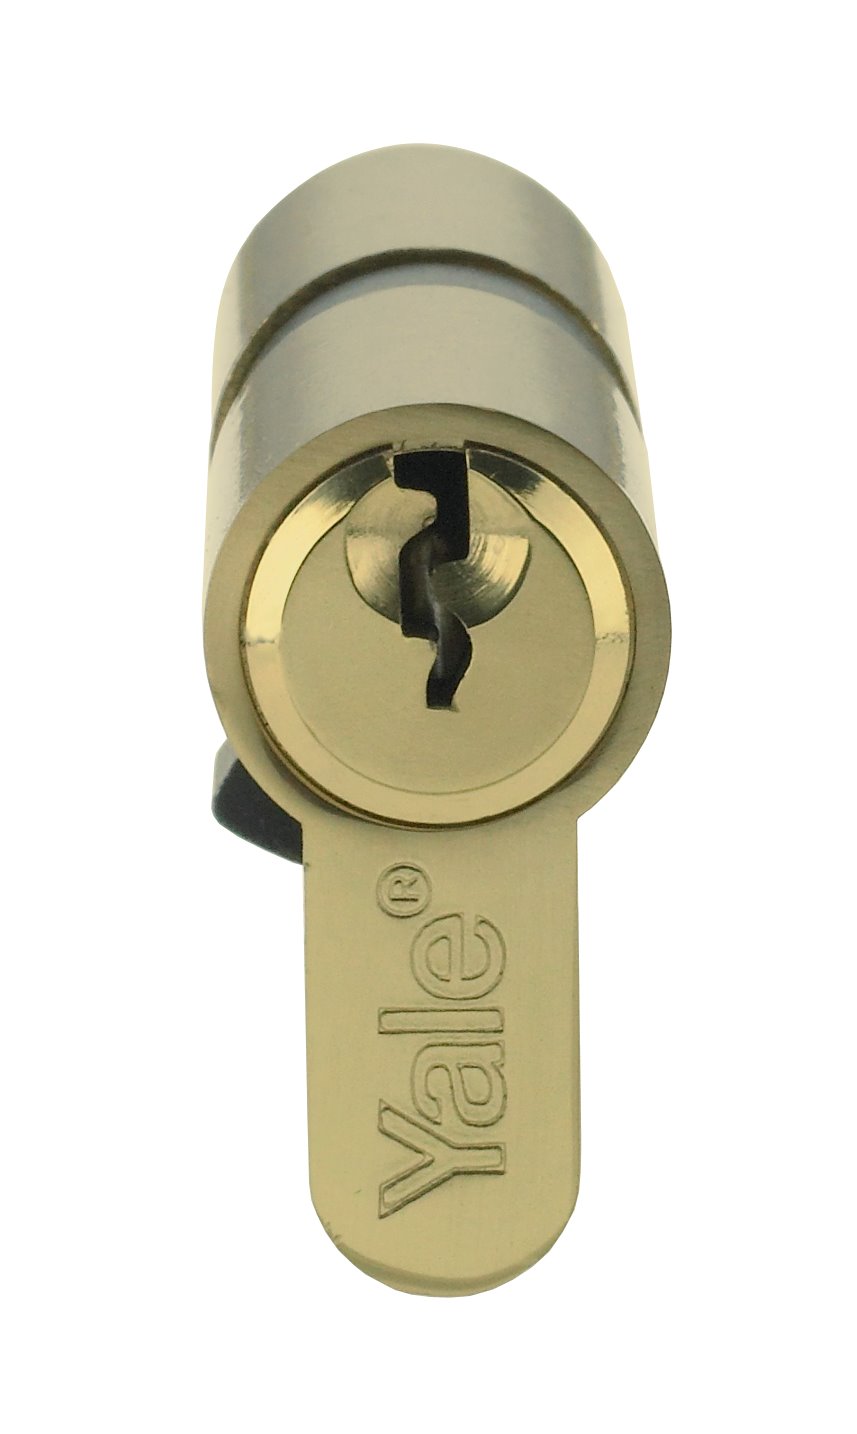 Asec 5 Pin Euro Cylinder Nickel Plated 80mm 40/40 Lock UPVC Door Yale Style 